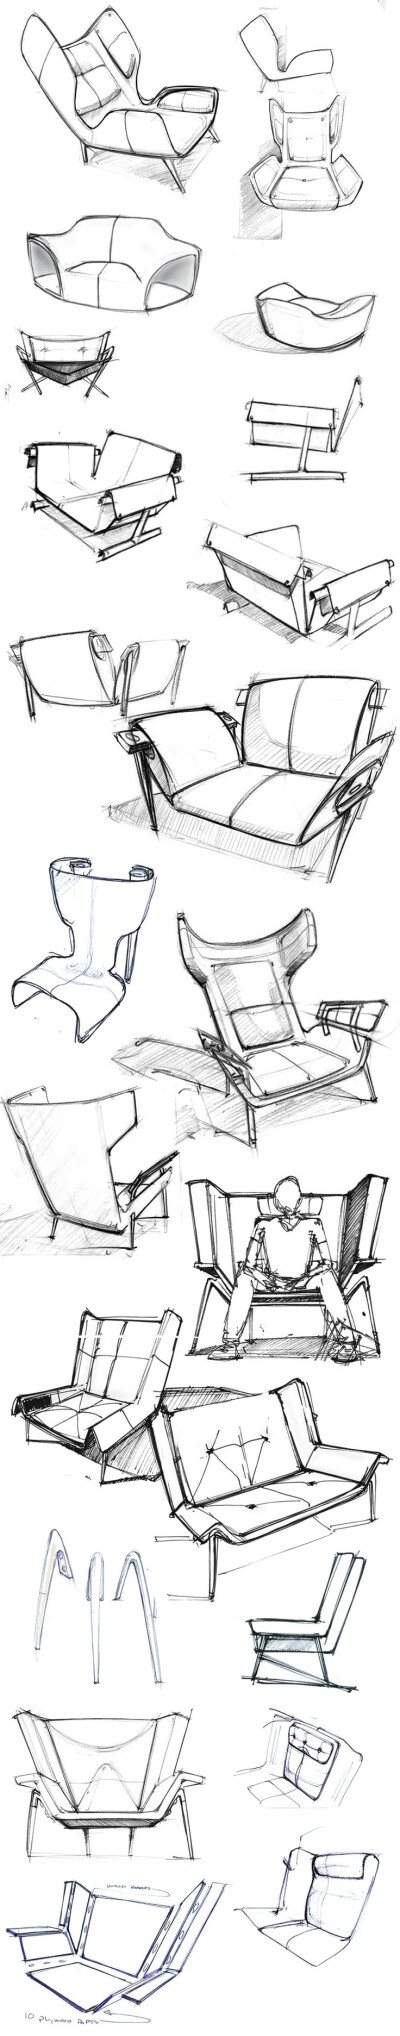 sketches of the Deca Lounge Chair by Larry Parker